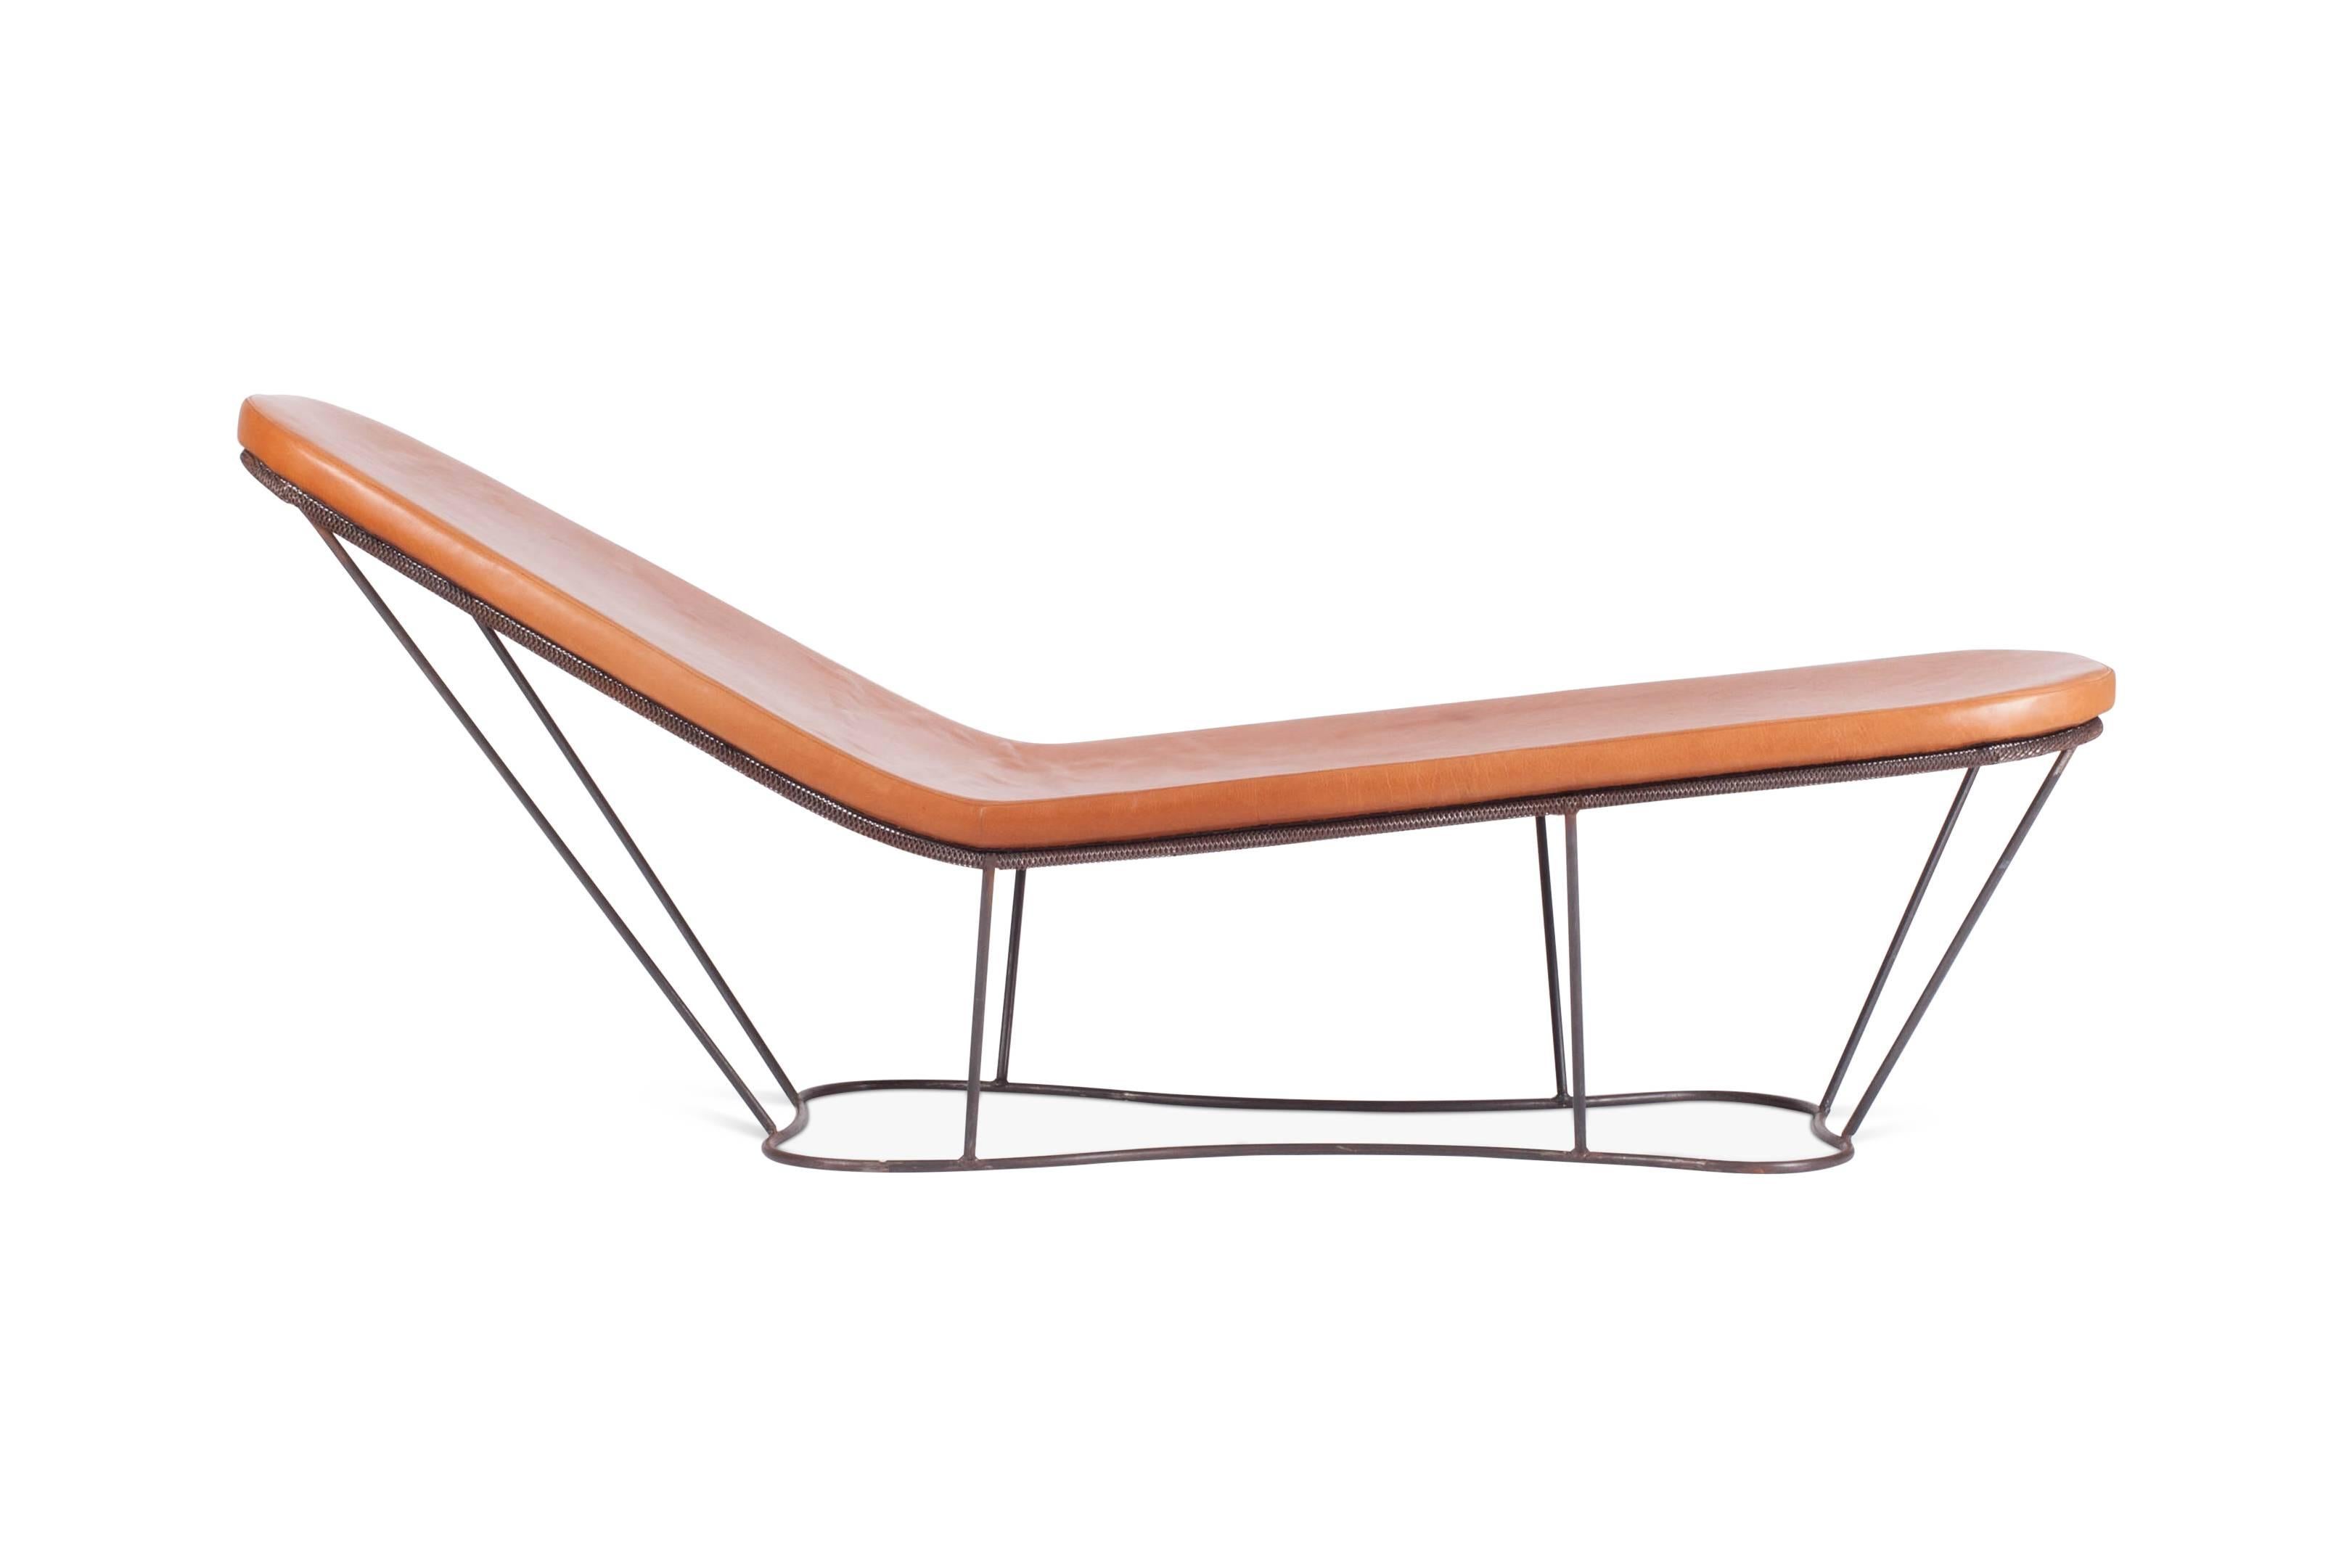 Steel Mid-Century Modern Cognac Leather Lounge Chair by Xavier Lust